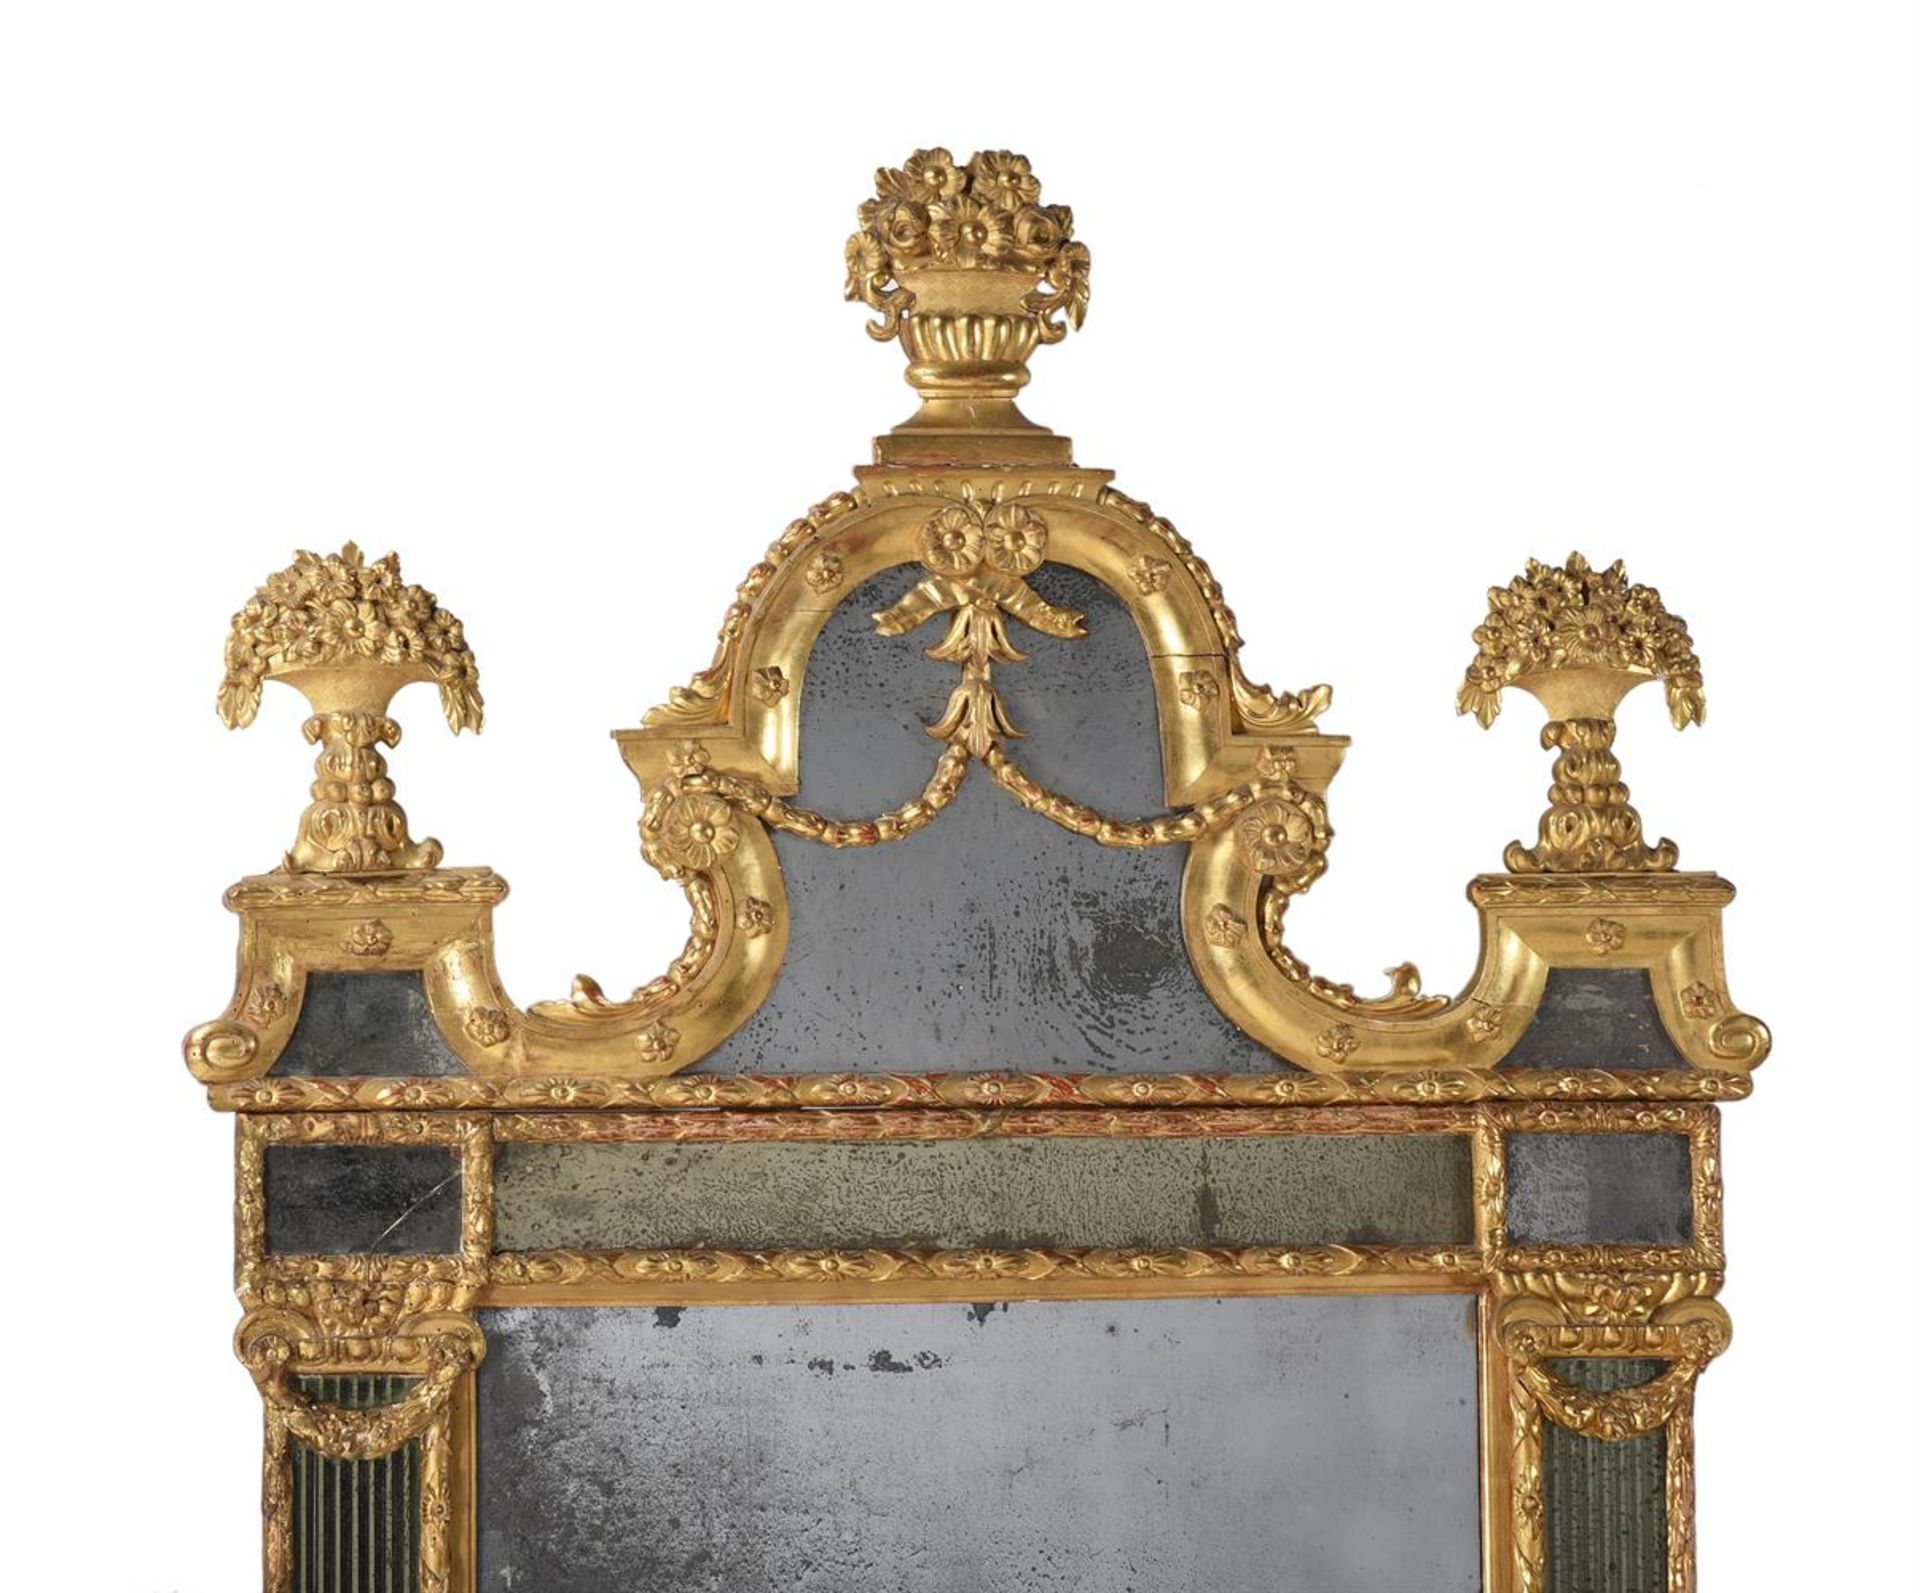 A LARGE CONTINENTAL CARVED GILTWOOD MIRROR, IN THE MANNER OF BURCHARD PRECHT - Image 2 of 7